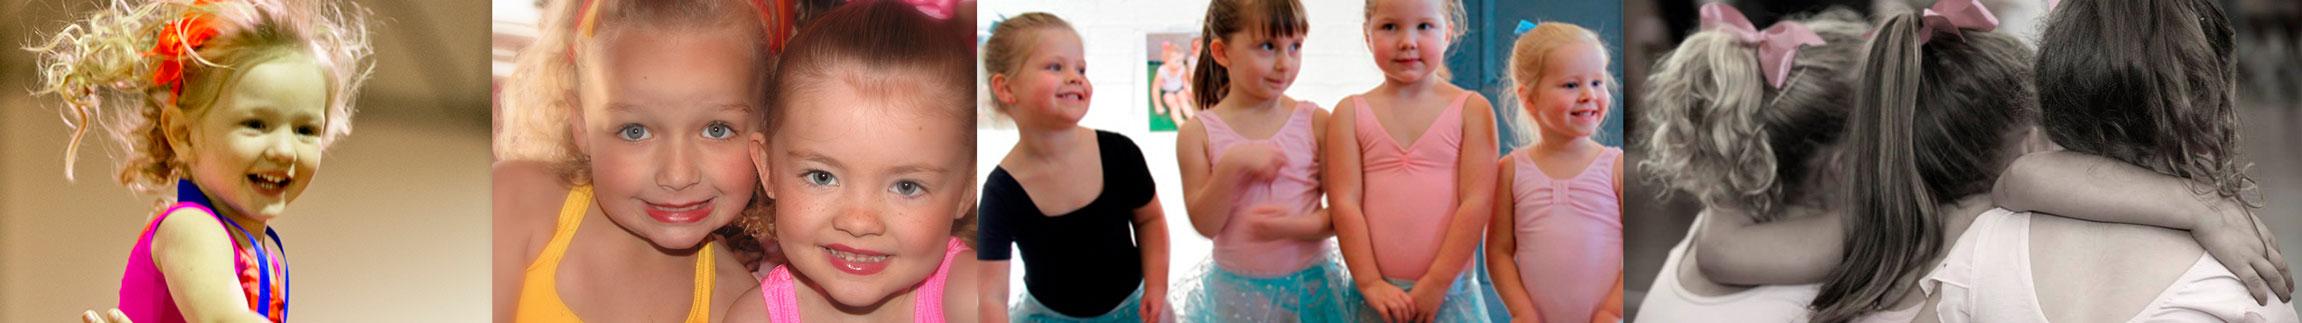 Classes at Coffs Coast Physie - for preschool girls teens and ladies aged 3 years old and up